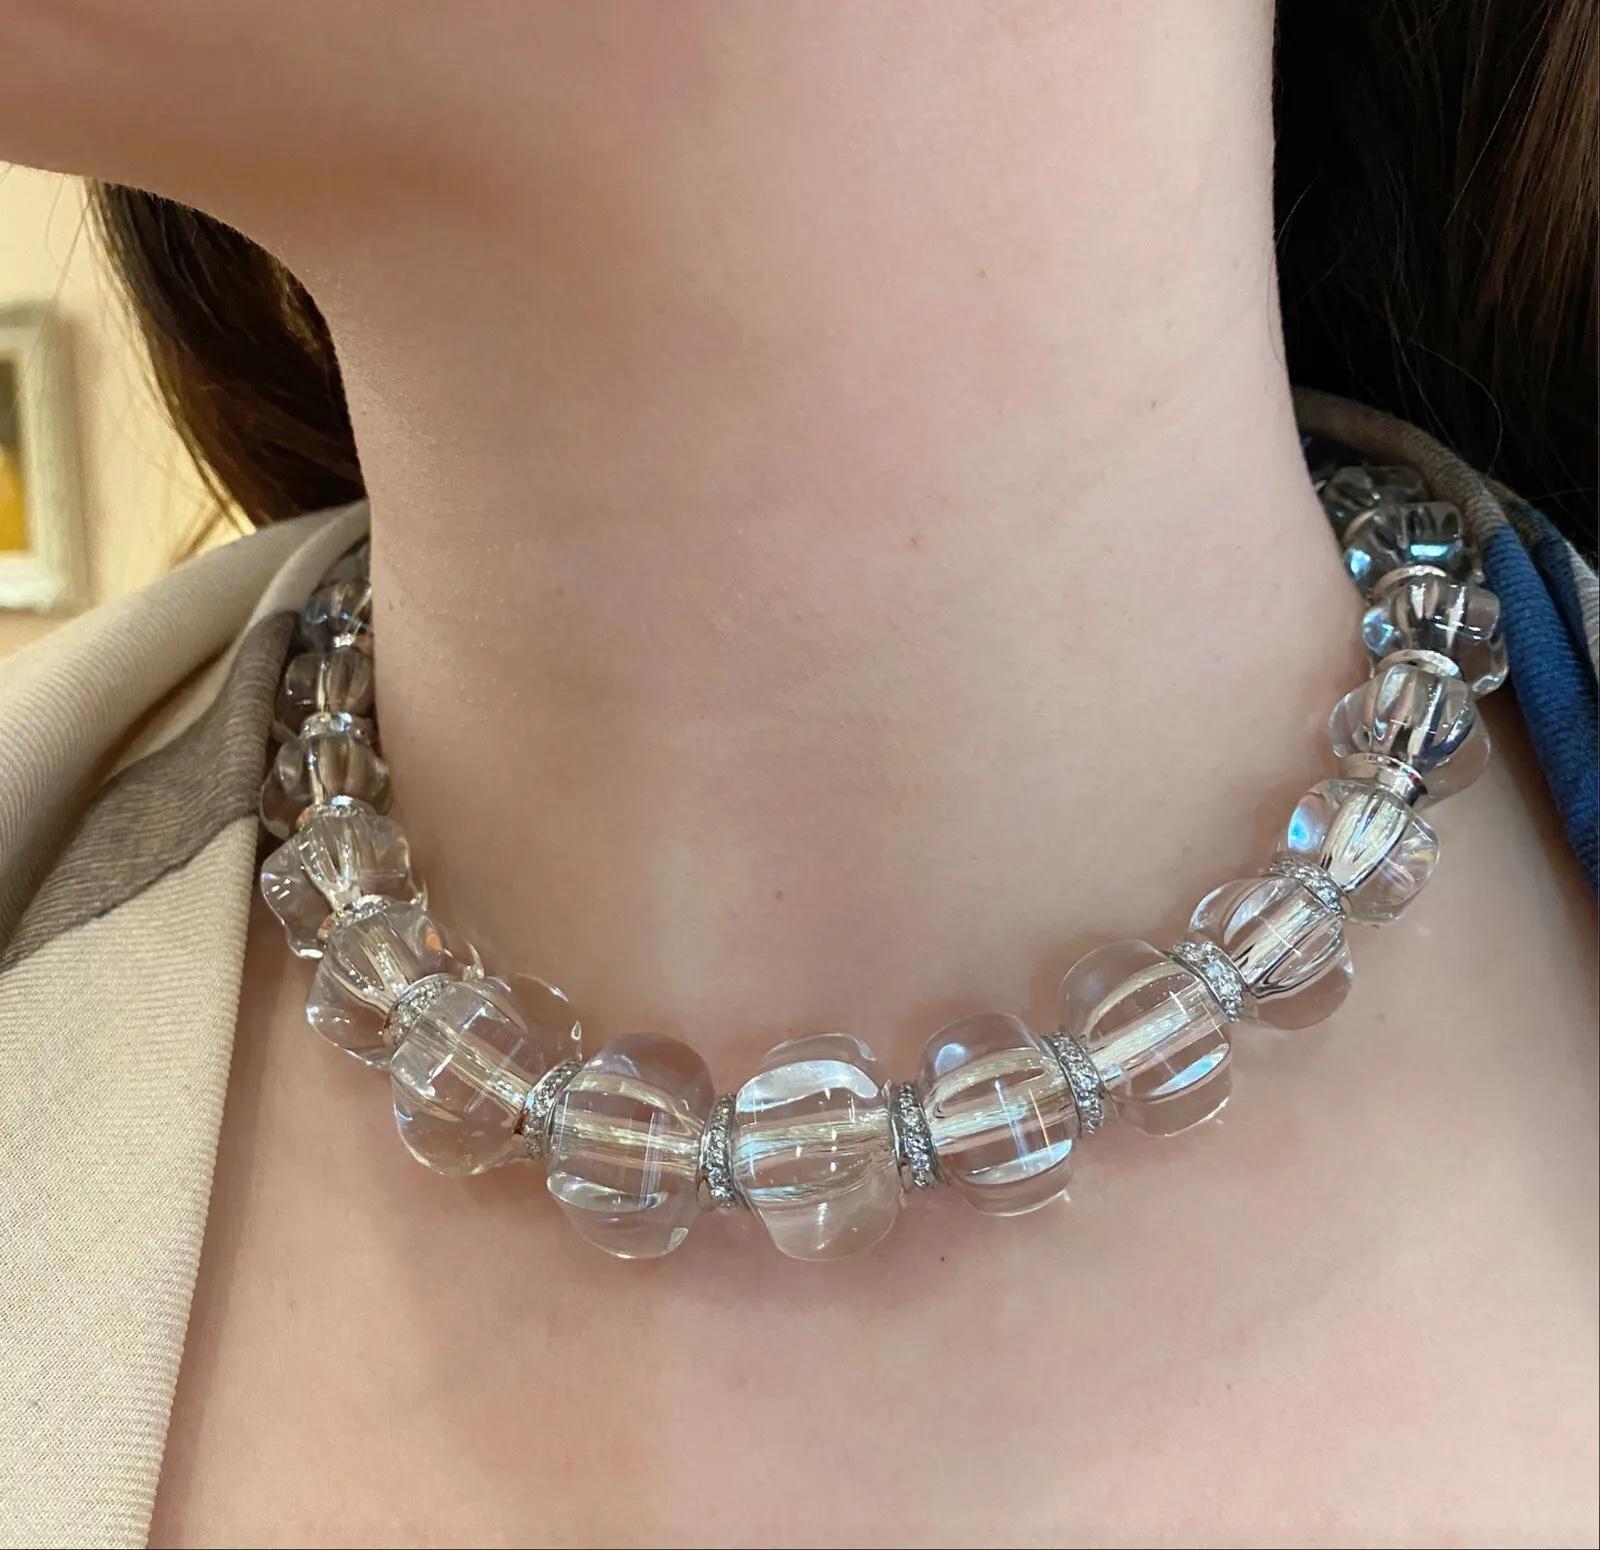 Baccarat Sherazade Crystal and Diamond Necklace in 18k White Gold France In Excellent Condition For Sale In La Jolla, CA